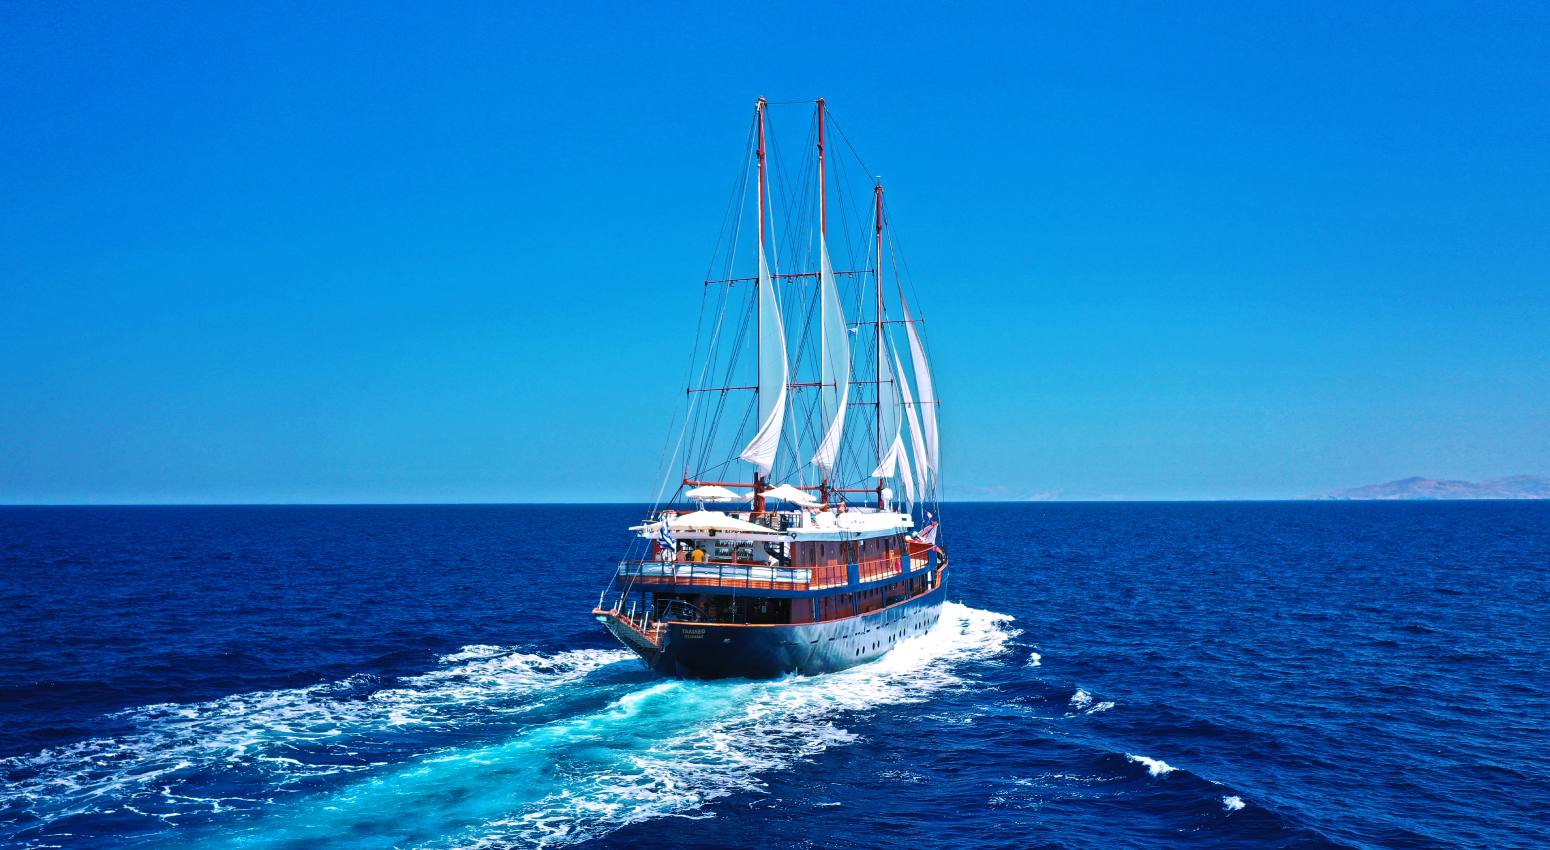 The Galileo yacht sailing in the sea